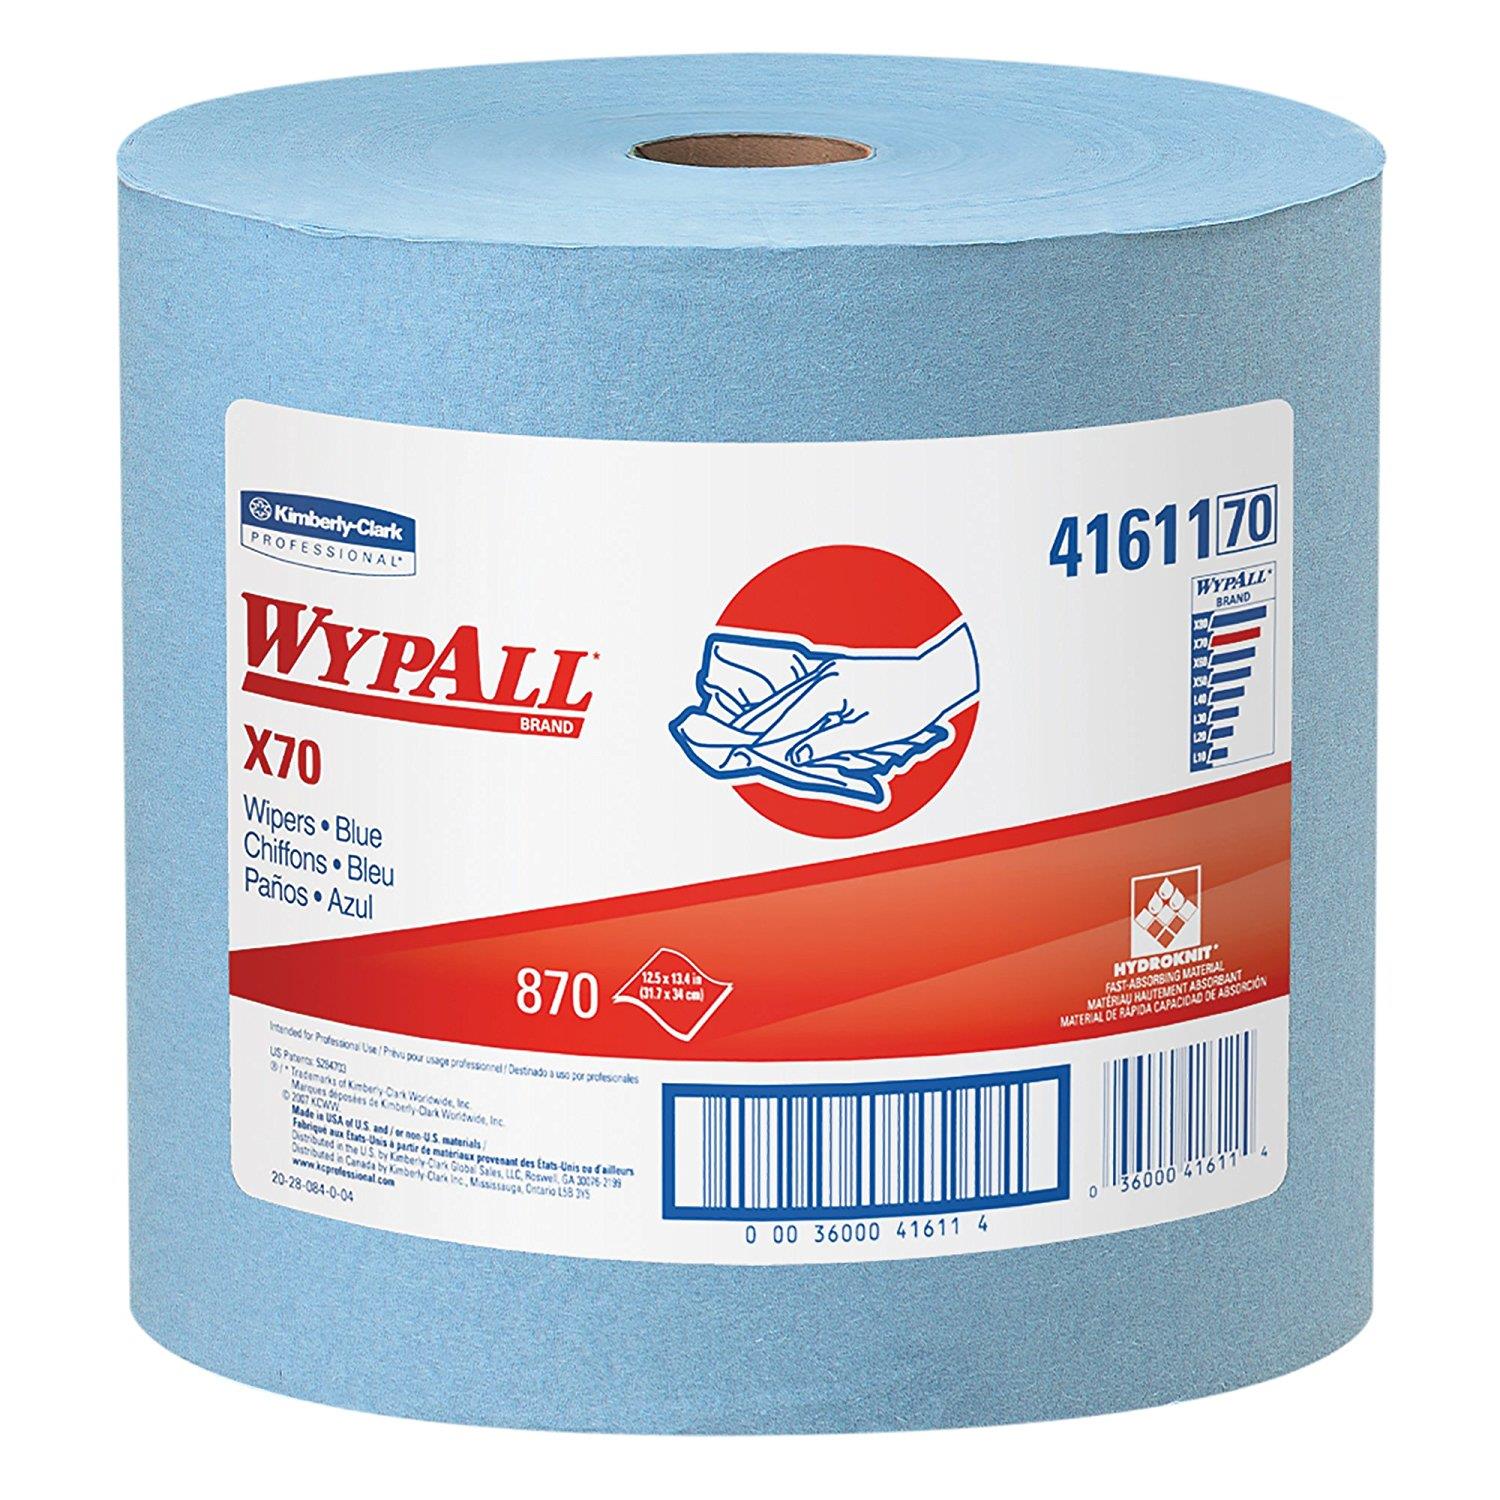 WYPALL X70 JUMBO ROLL BLUE 870 WIPERS - WYPALL X70